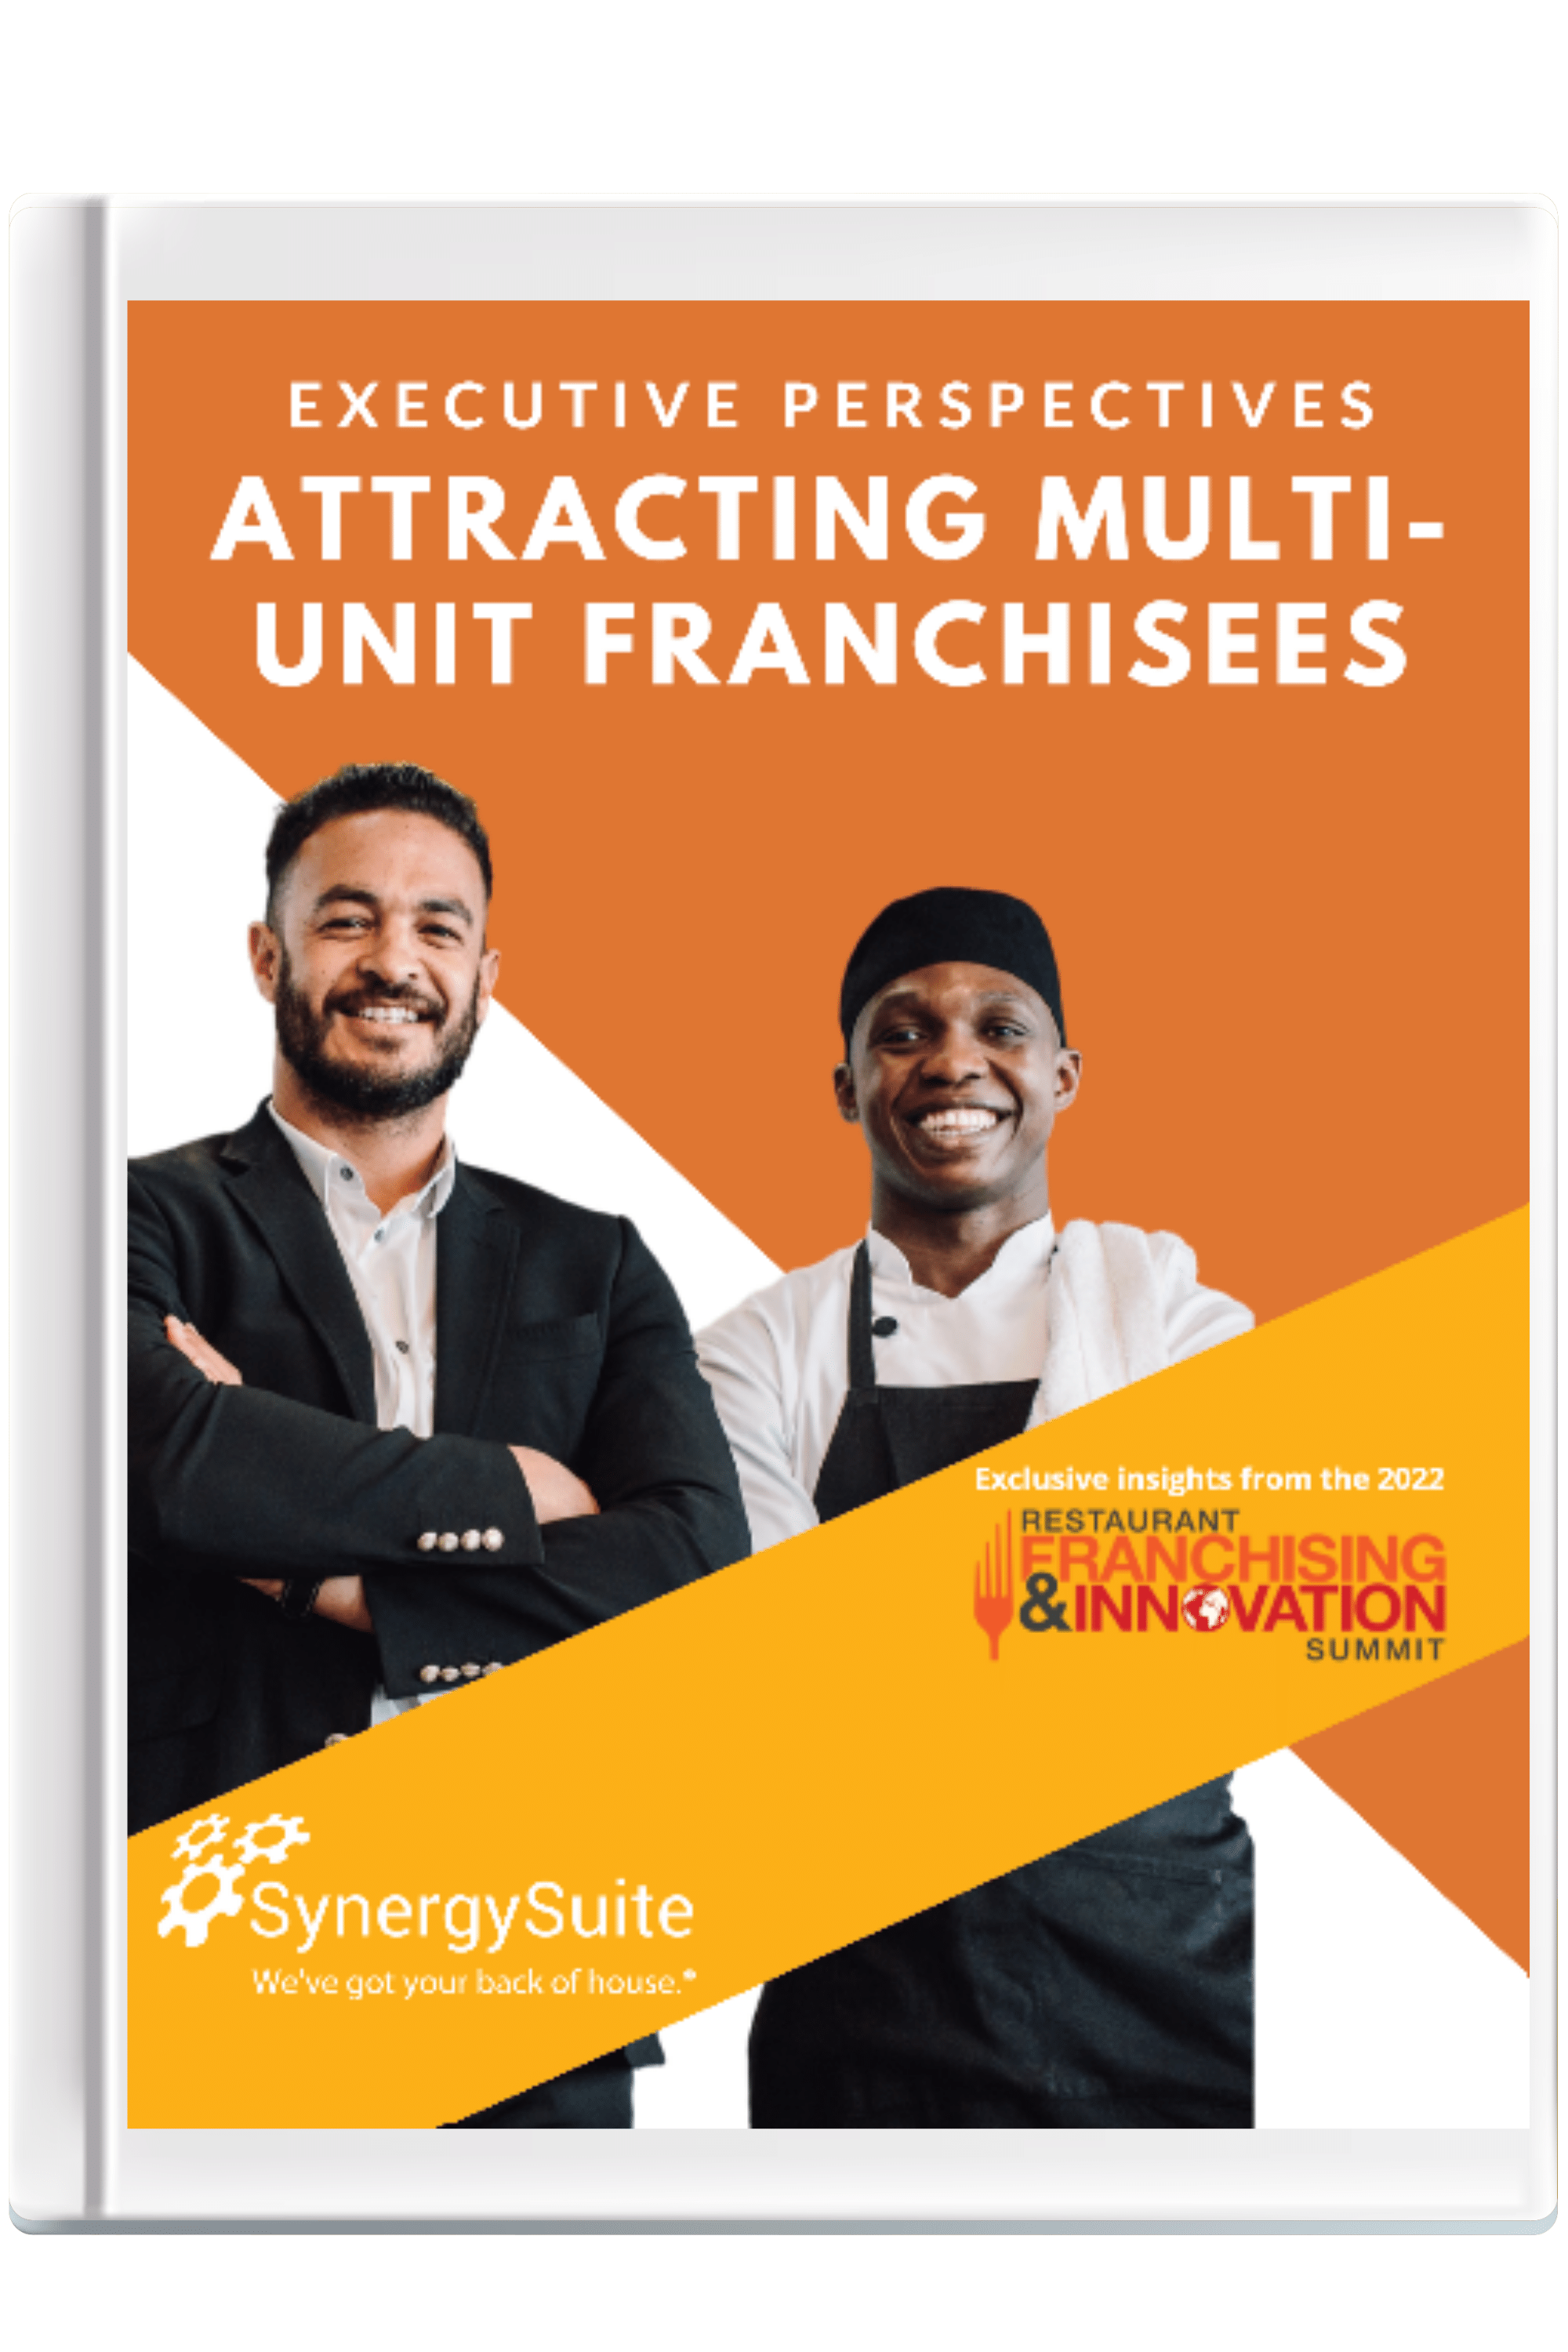 Attracting multi unit franchisees RFIS & SYNERGYSUITE 2022 - Brett Berger (Book Cover) (2000 × 3000 px) (1)